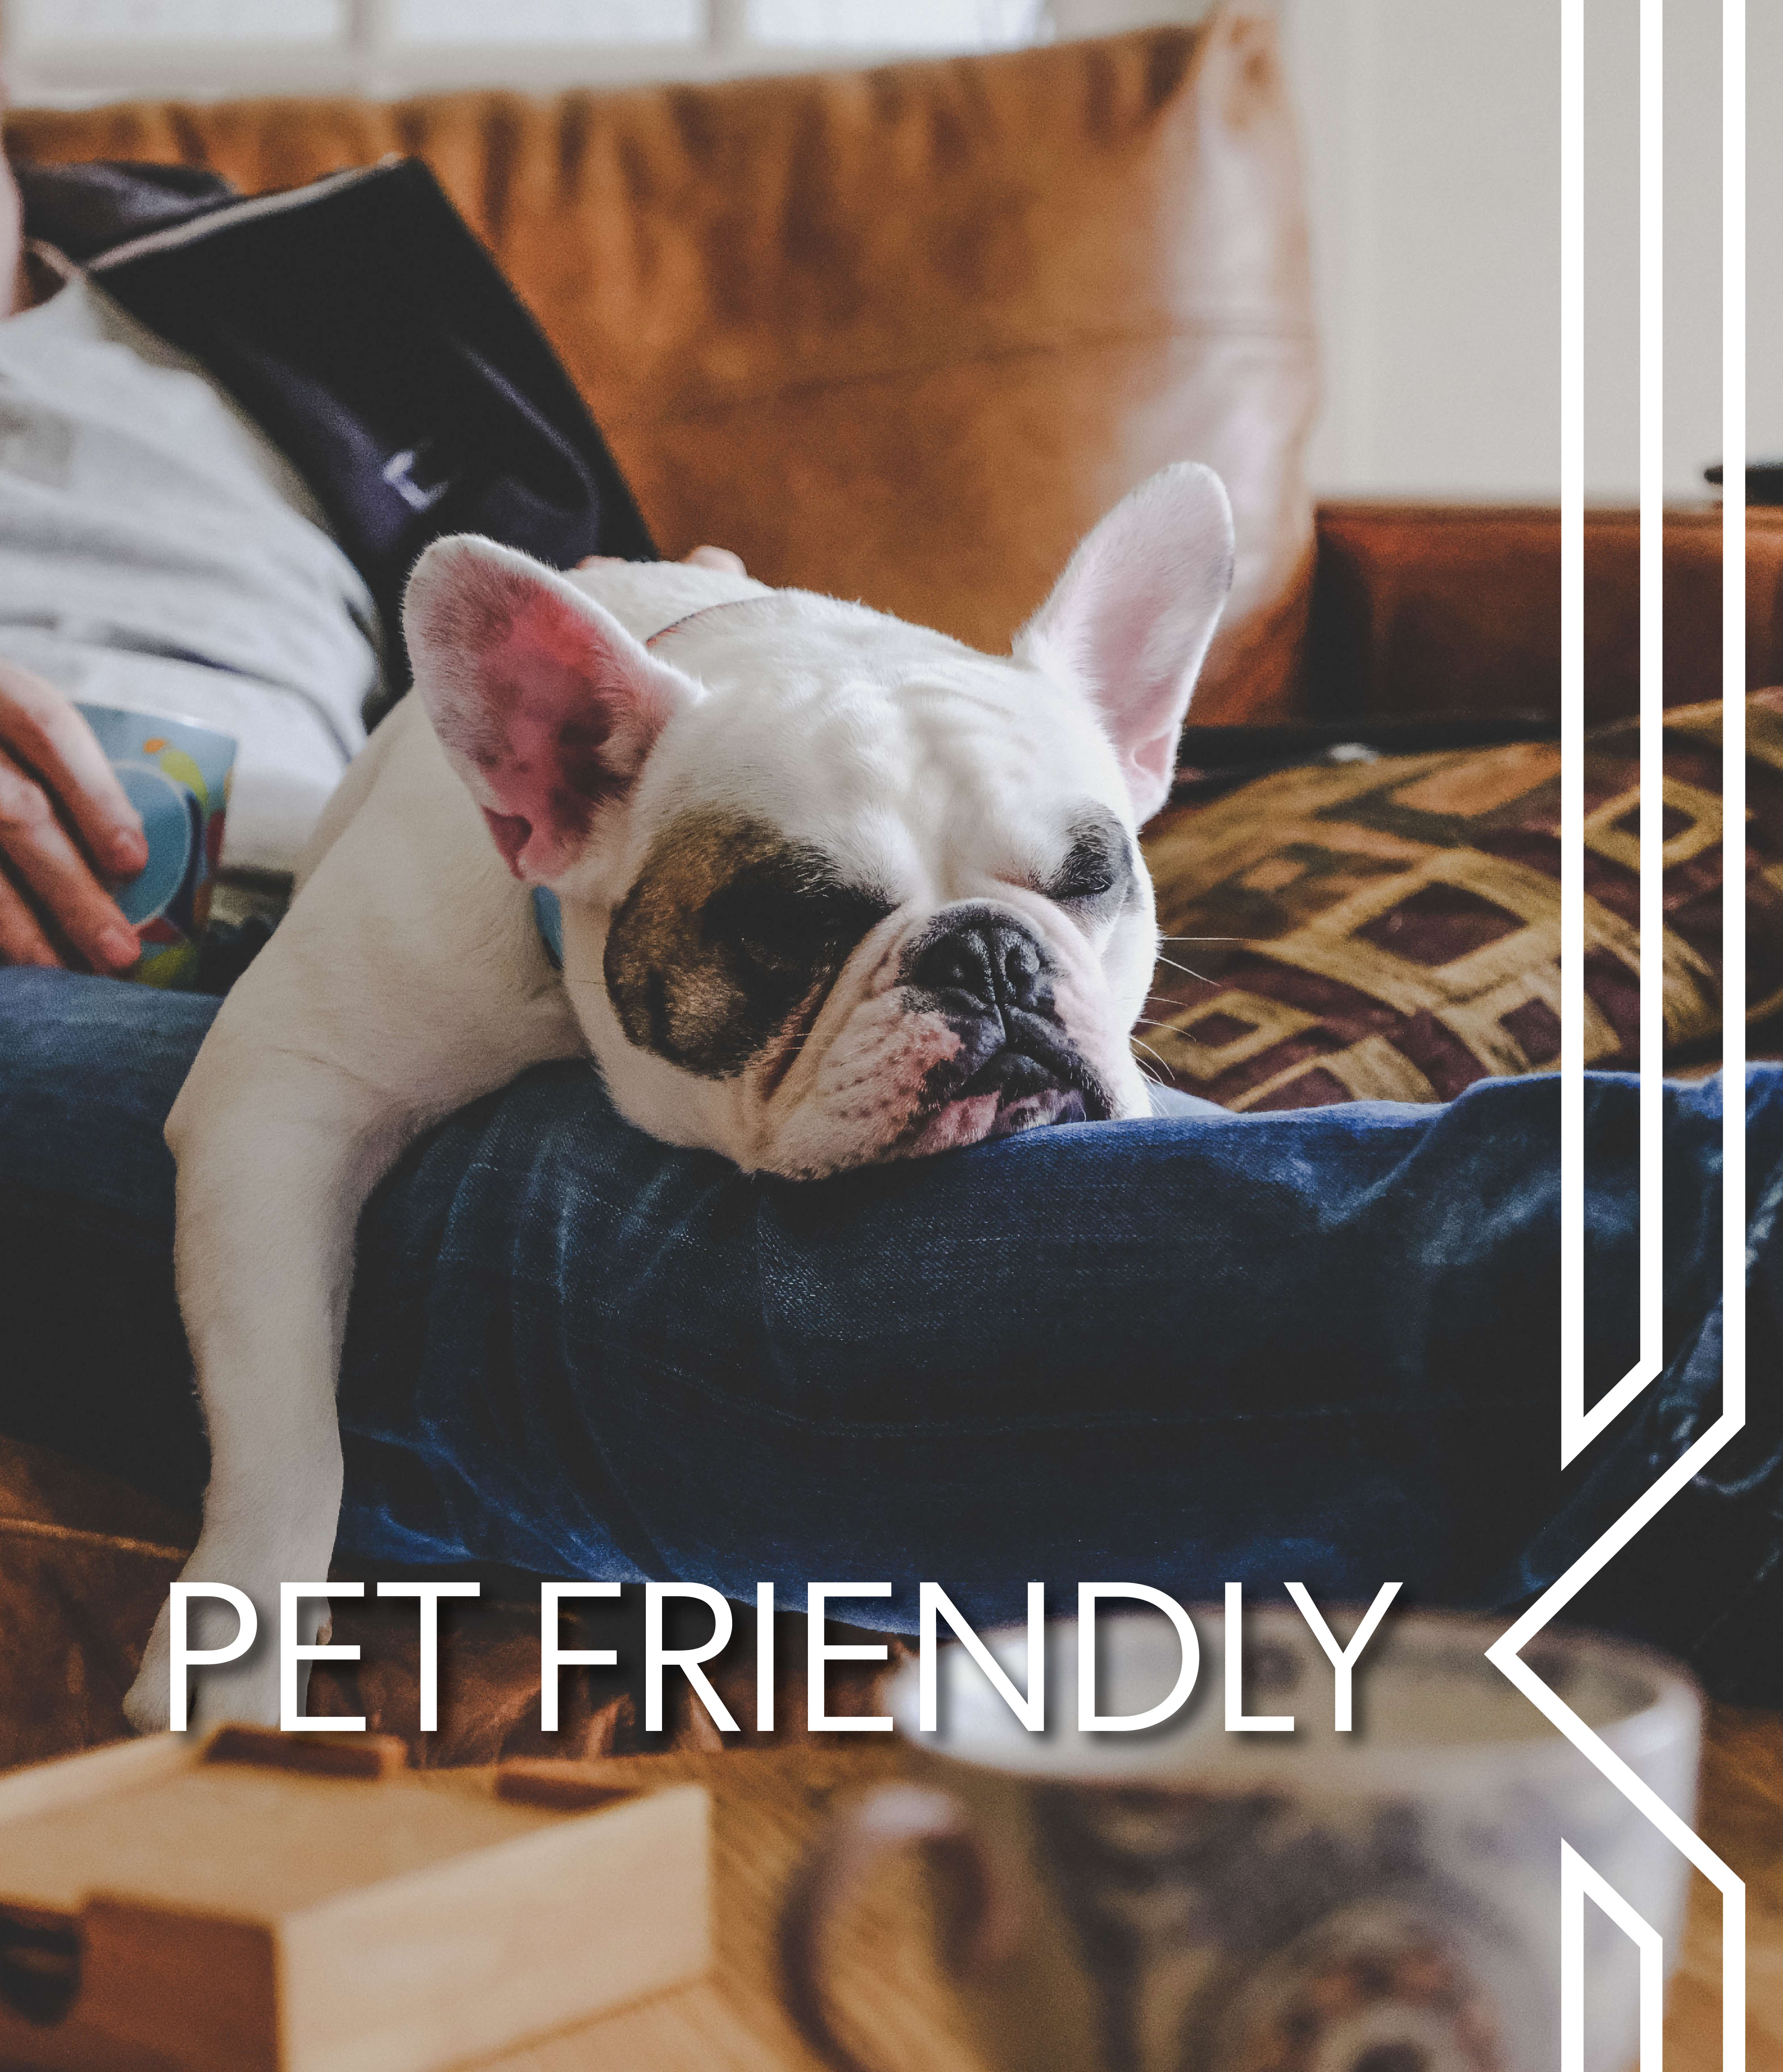 View our pet policy at Arbor Crossing Apartments in Lithonia, Georgia